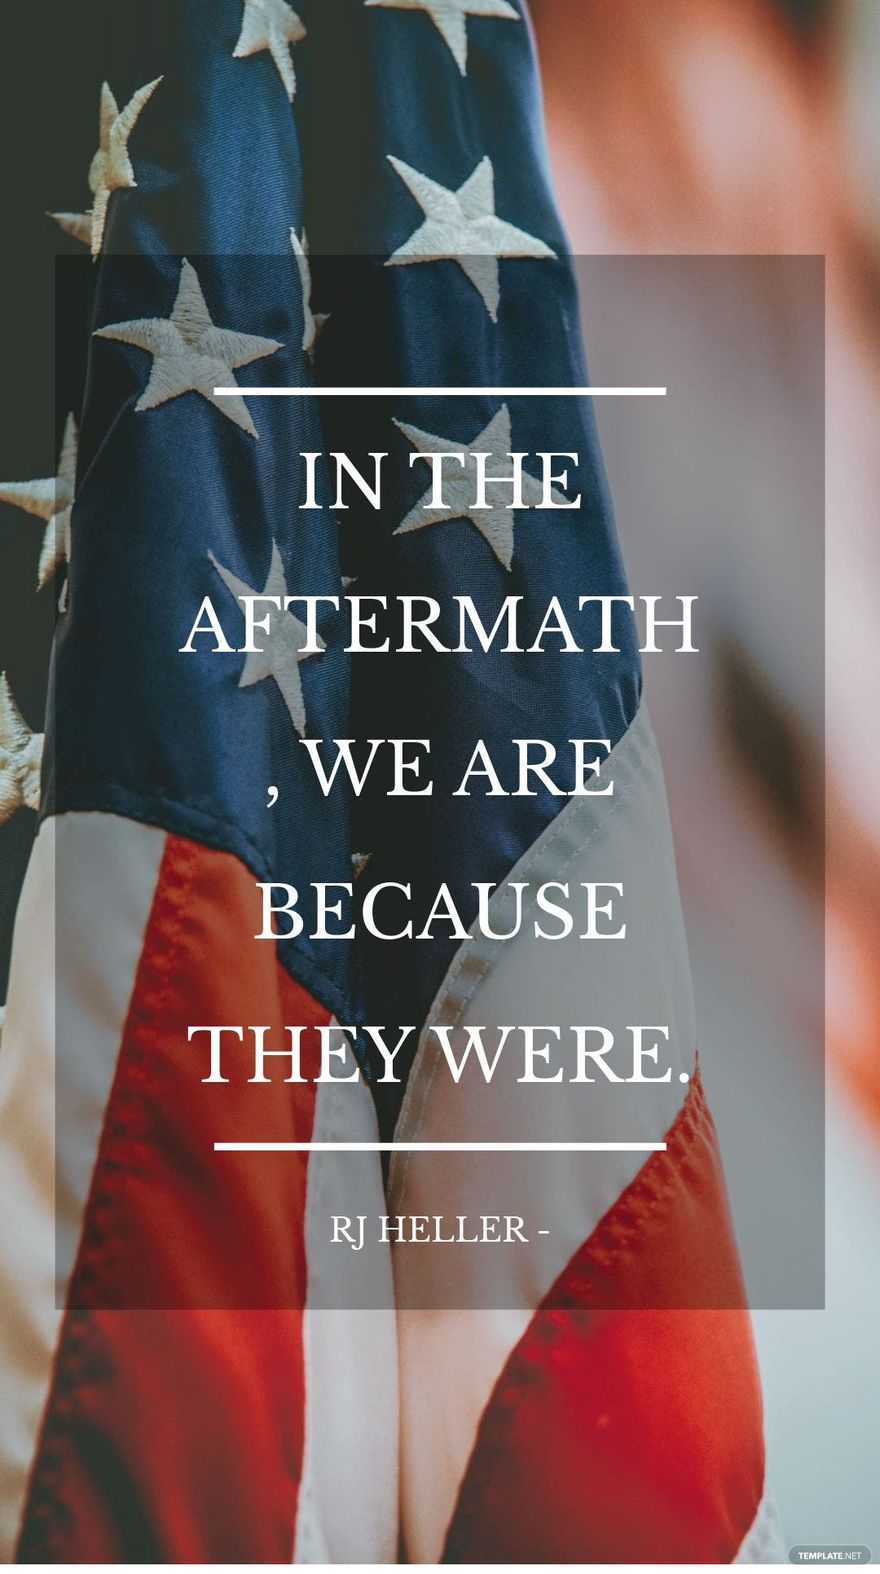 RJ Heller - In the aftermath, we are because they were. in JPG